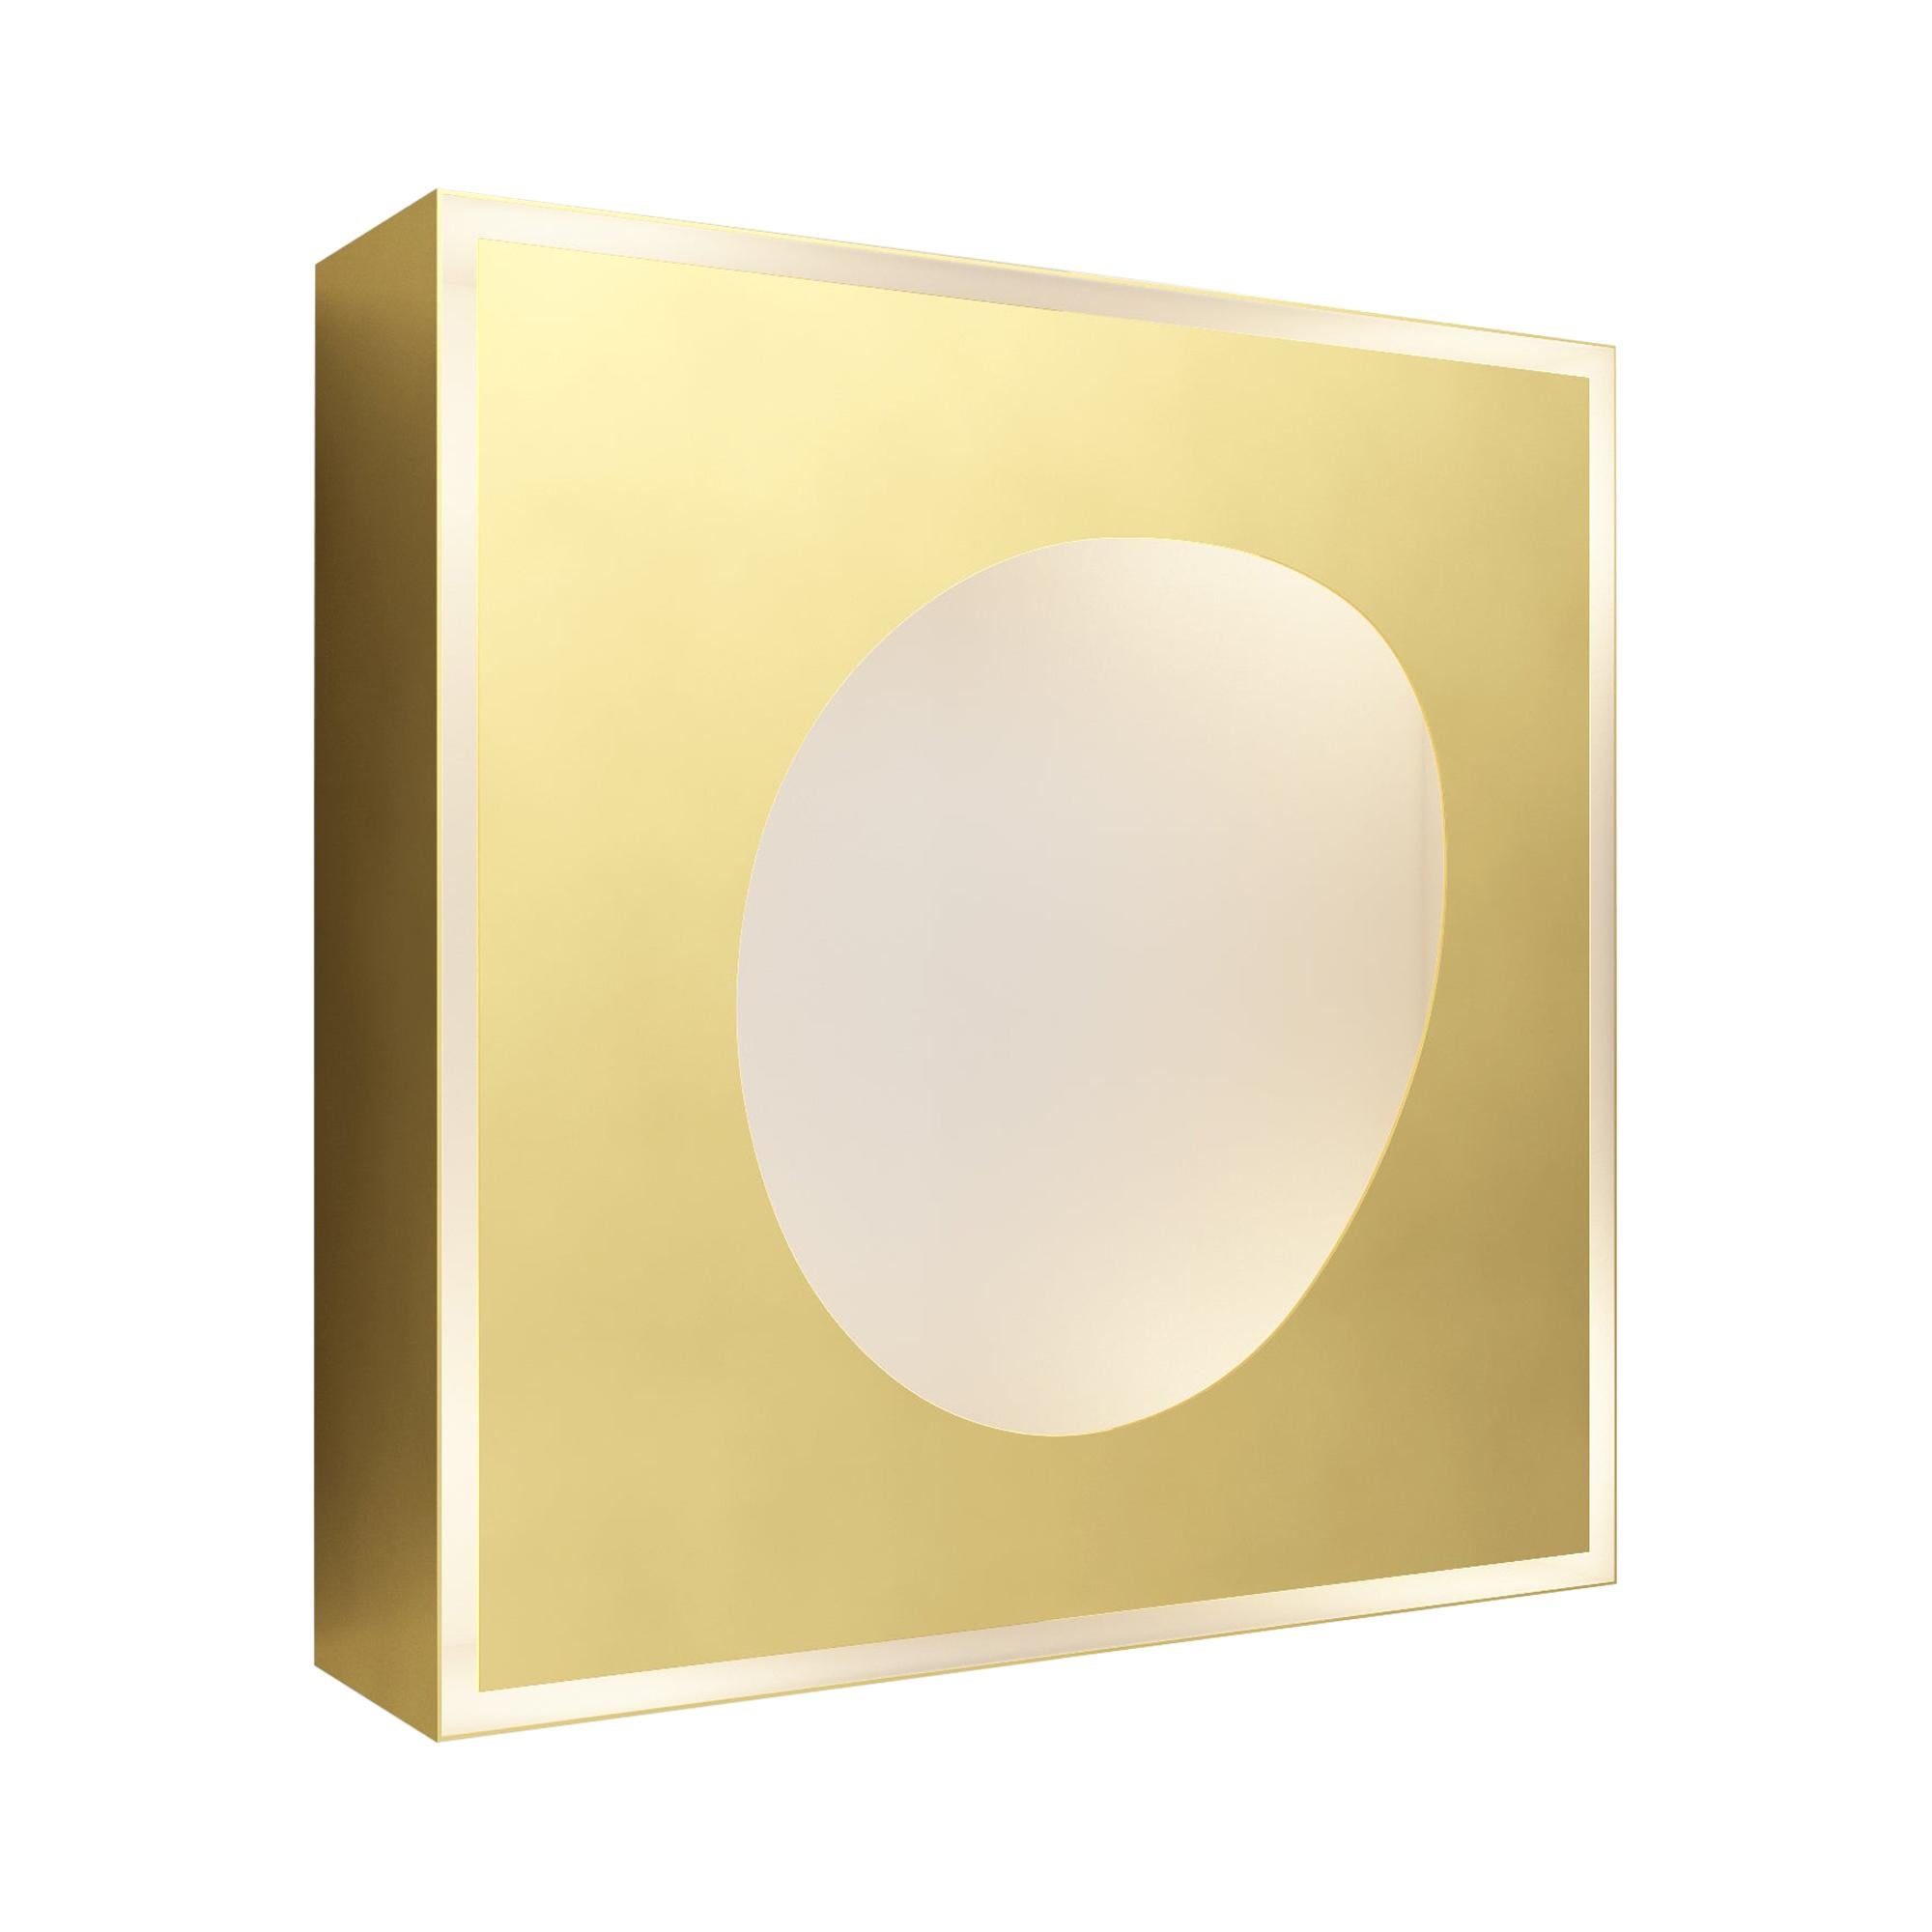 Wall sconce FC01 by Florencia Costa polished brass Italy 2020 Limited Edition = For Sale